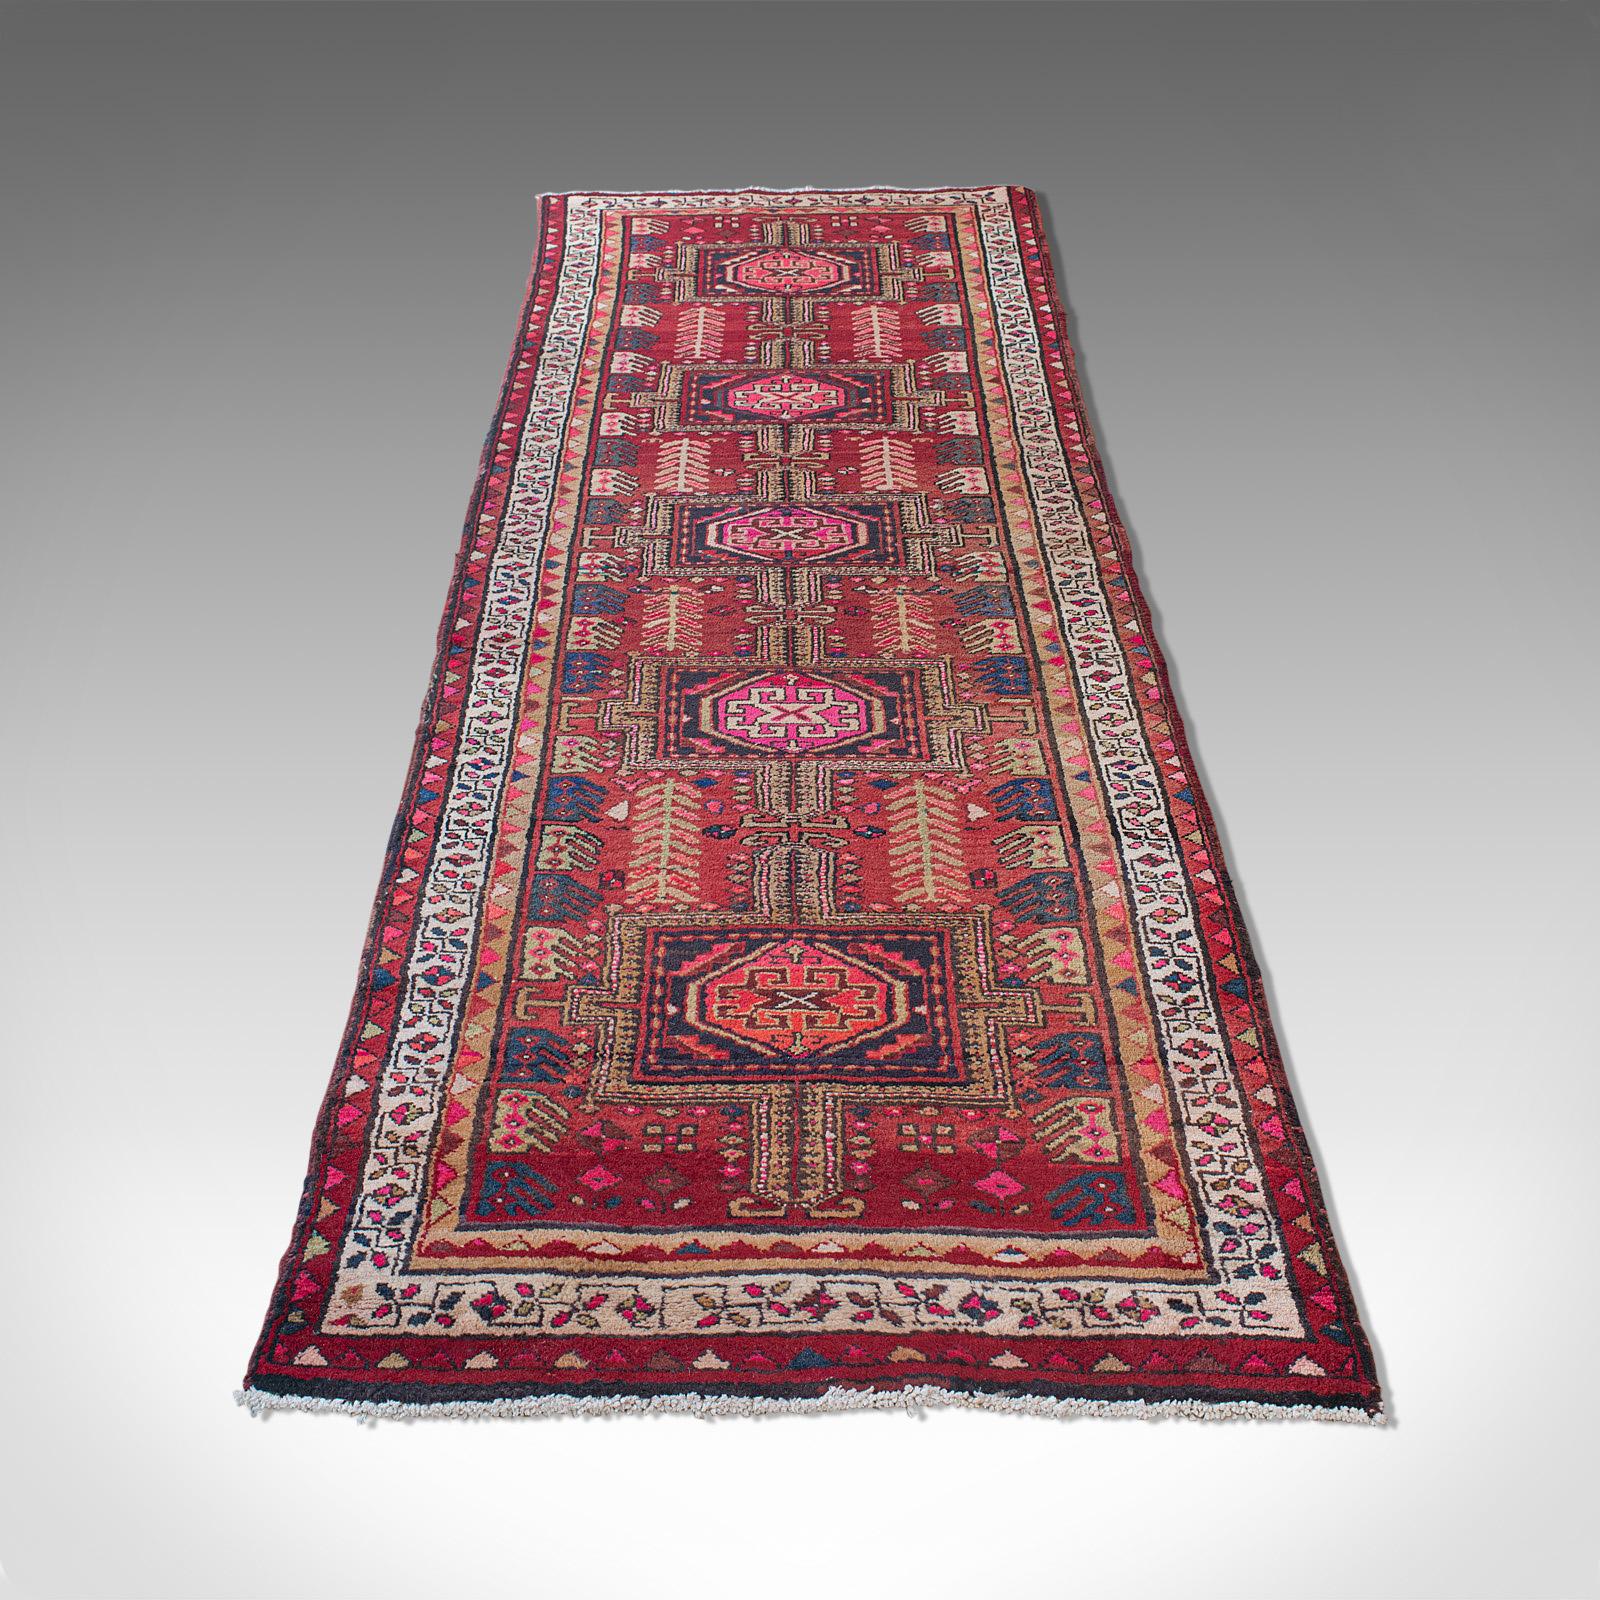 This is a large vintage Baluchi hallway runner. A Persian, woven hall rug or carpet, dating to the mid-20th century, circa 1960.

Dashing colors and great length for the grand reception hall
Displaying a desirable aged patina
Woven crimson